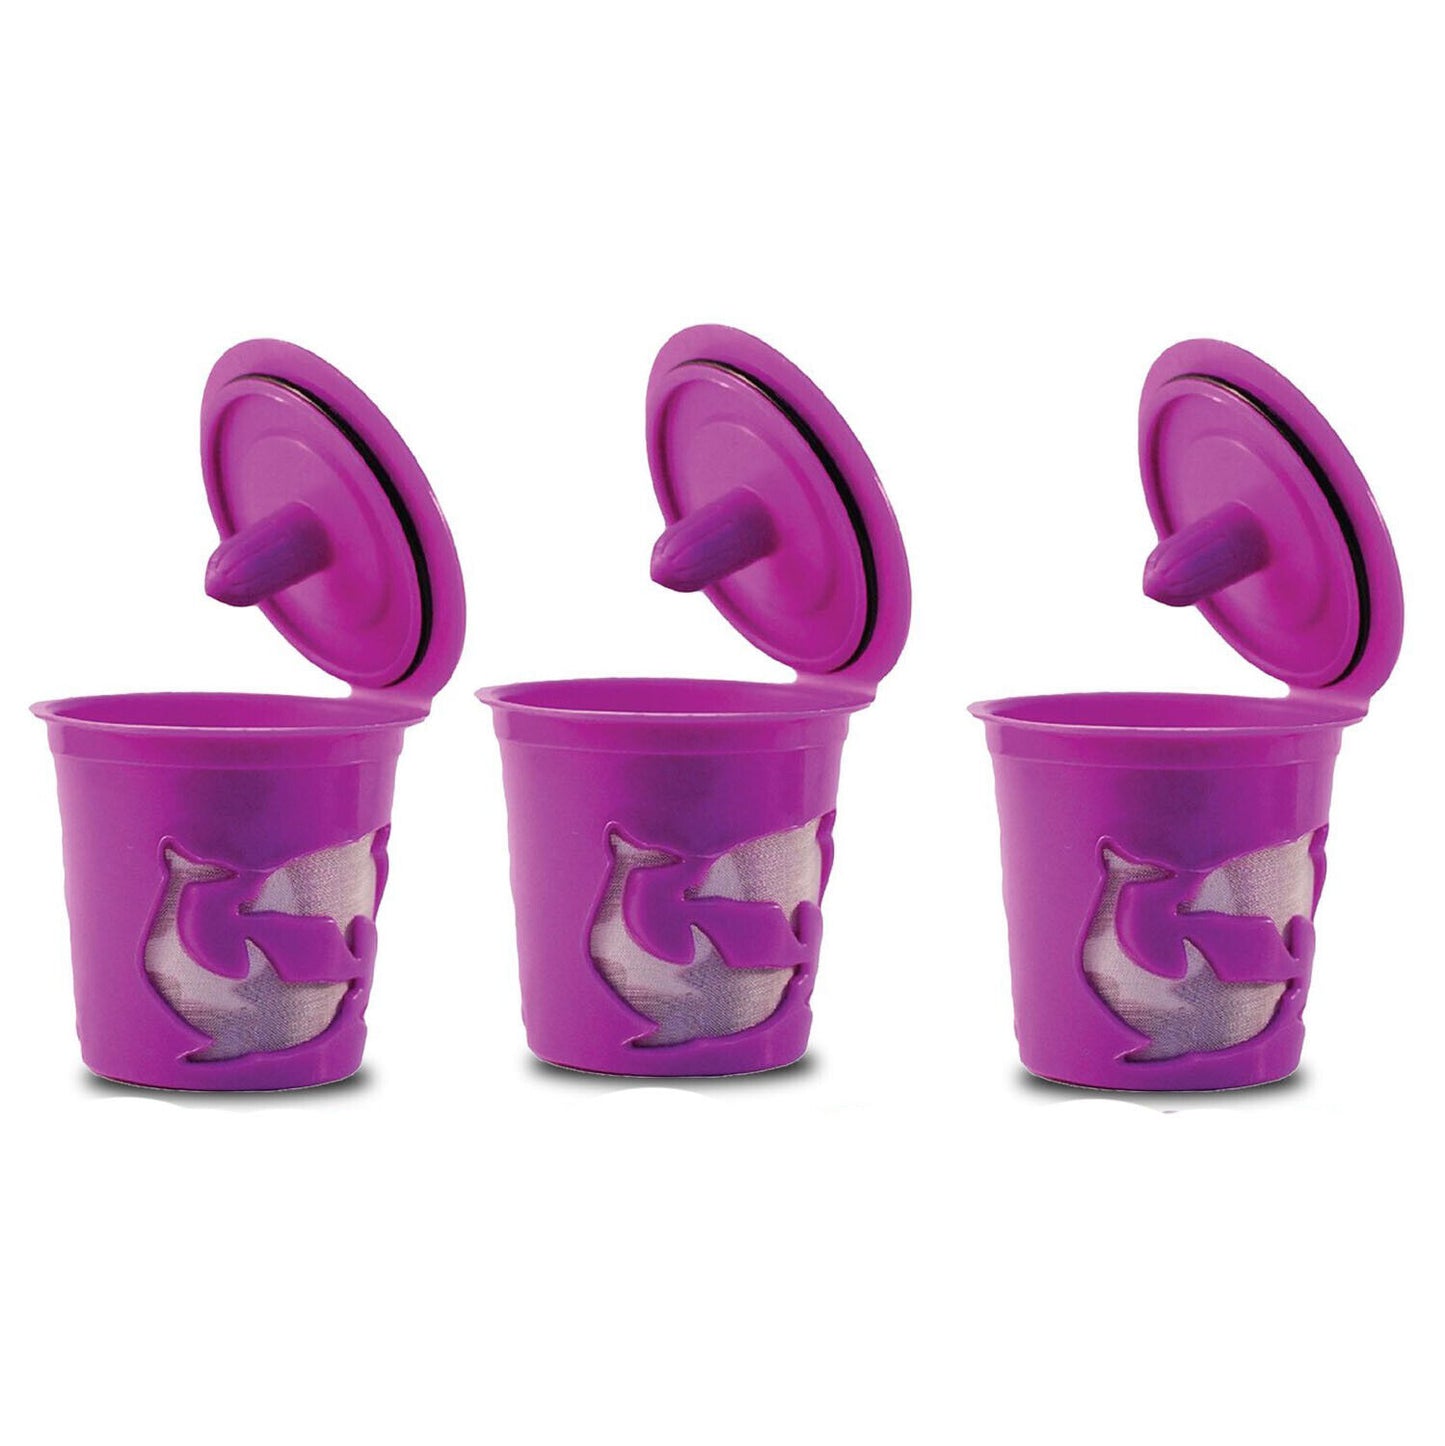 Purple K-Cup Reusable Refillable Replacement Coffee Filter Holder Pod for Keurig